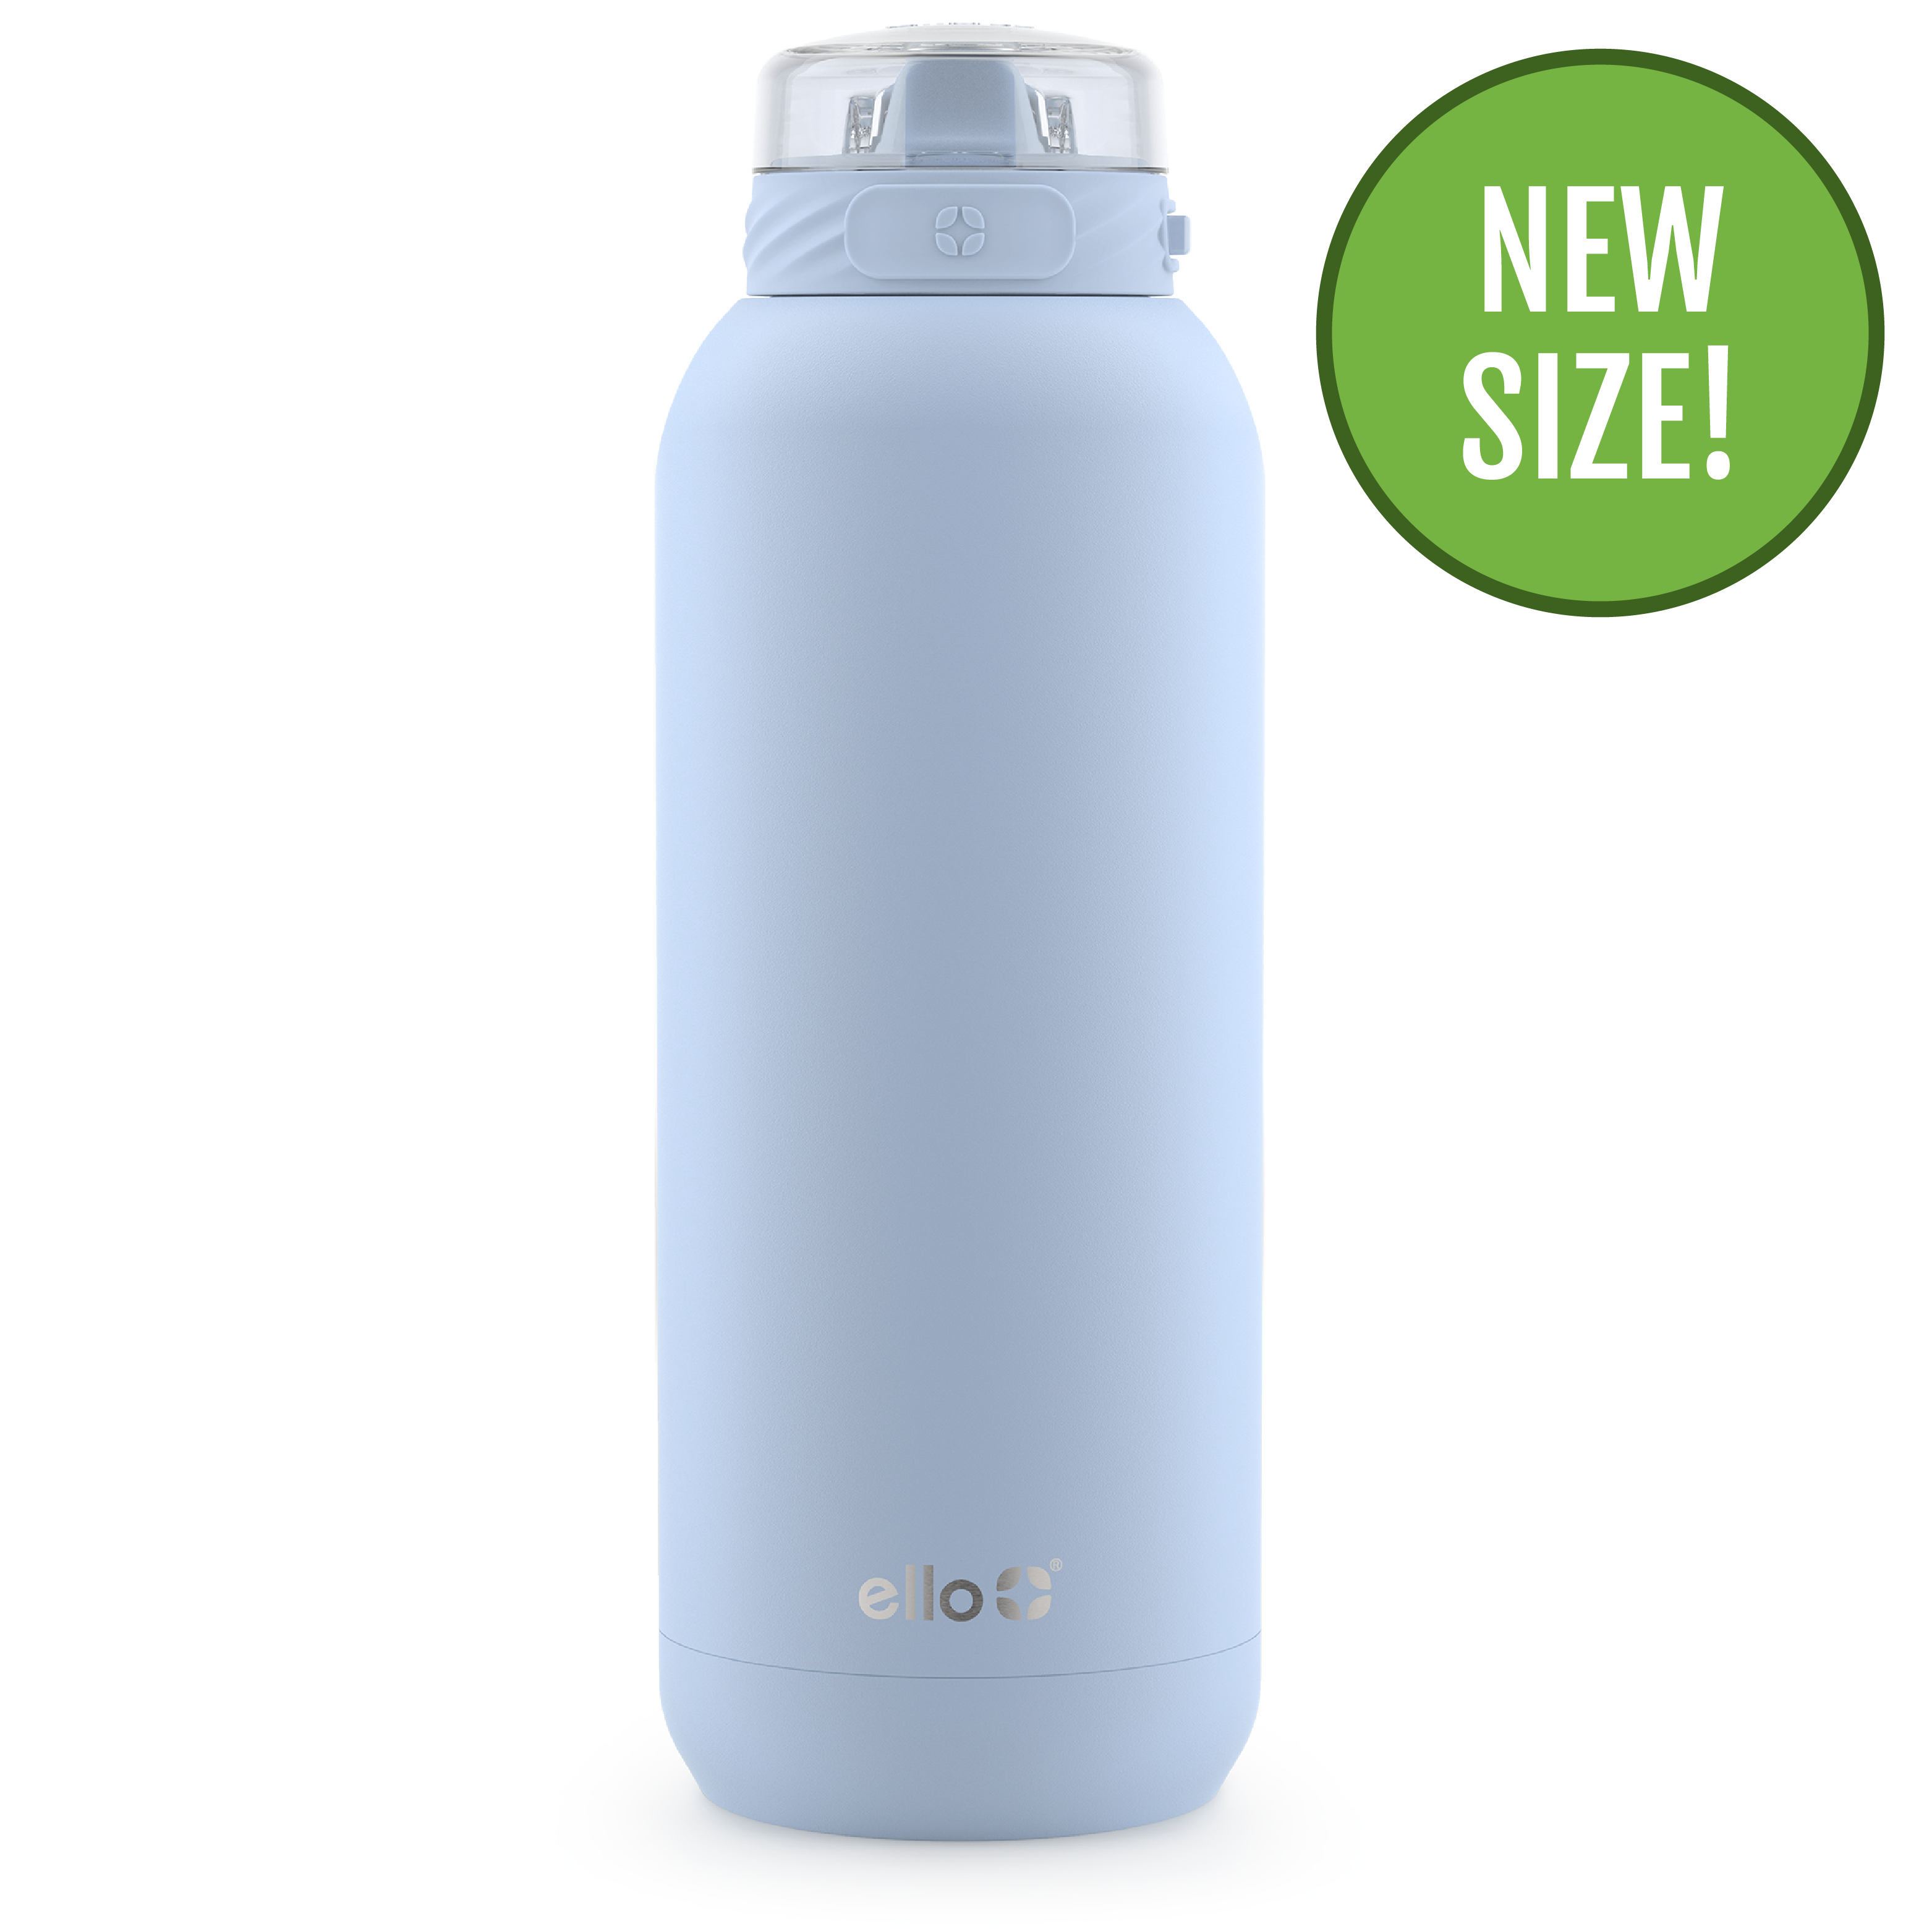 Ello Cooper Vacuum Insulated Stainless Steel Water Bottle with Silicone Straw, 22 oz